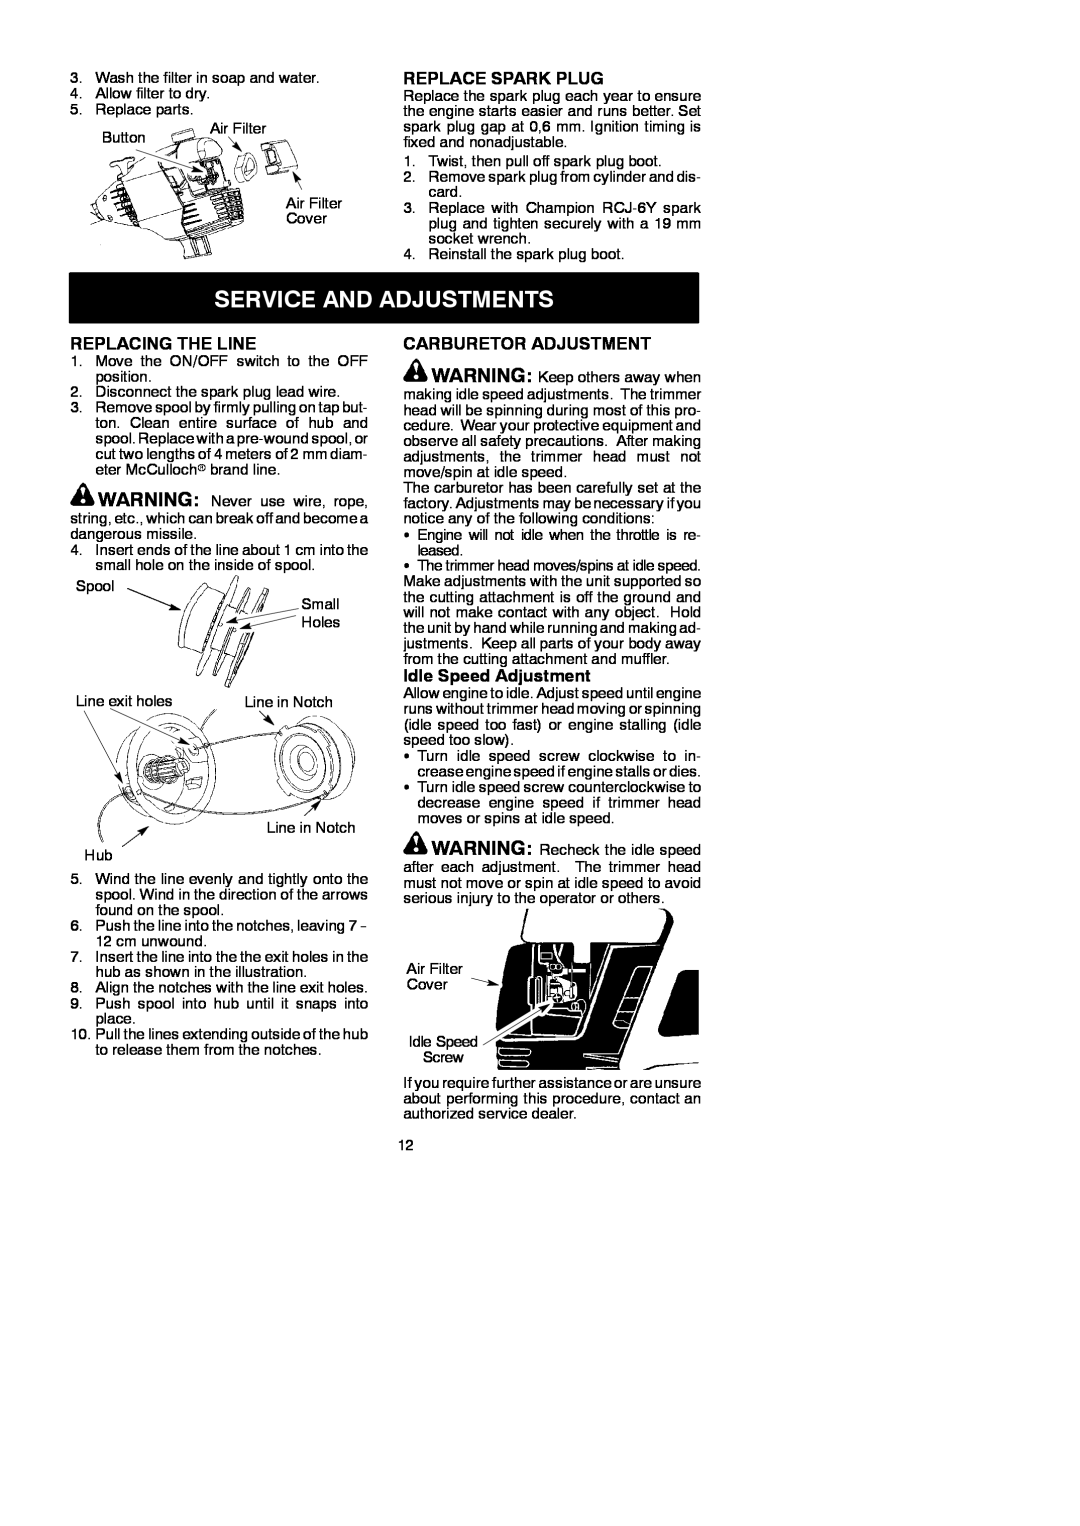 McCulloch 281 instruction manual Service And Adjustments, Replace Spark Plug, Replacing The Line, Carburetor Adjustment 